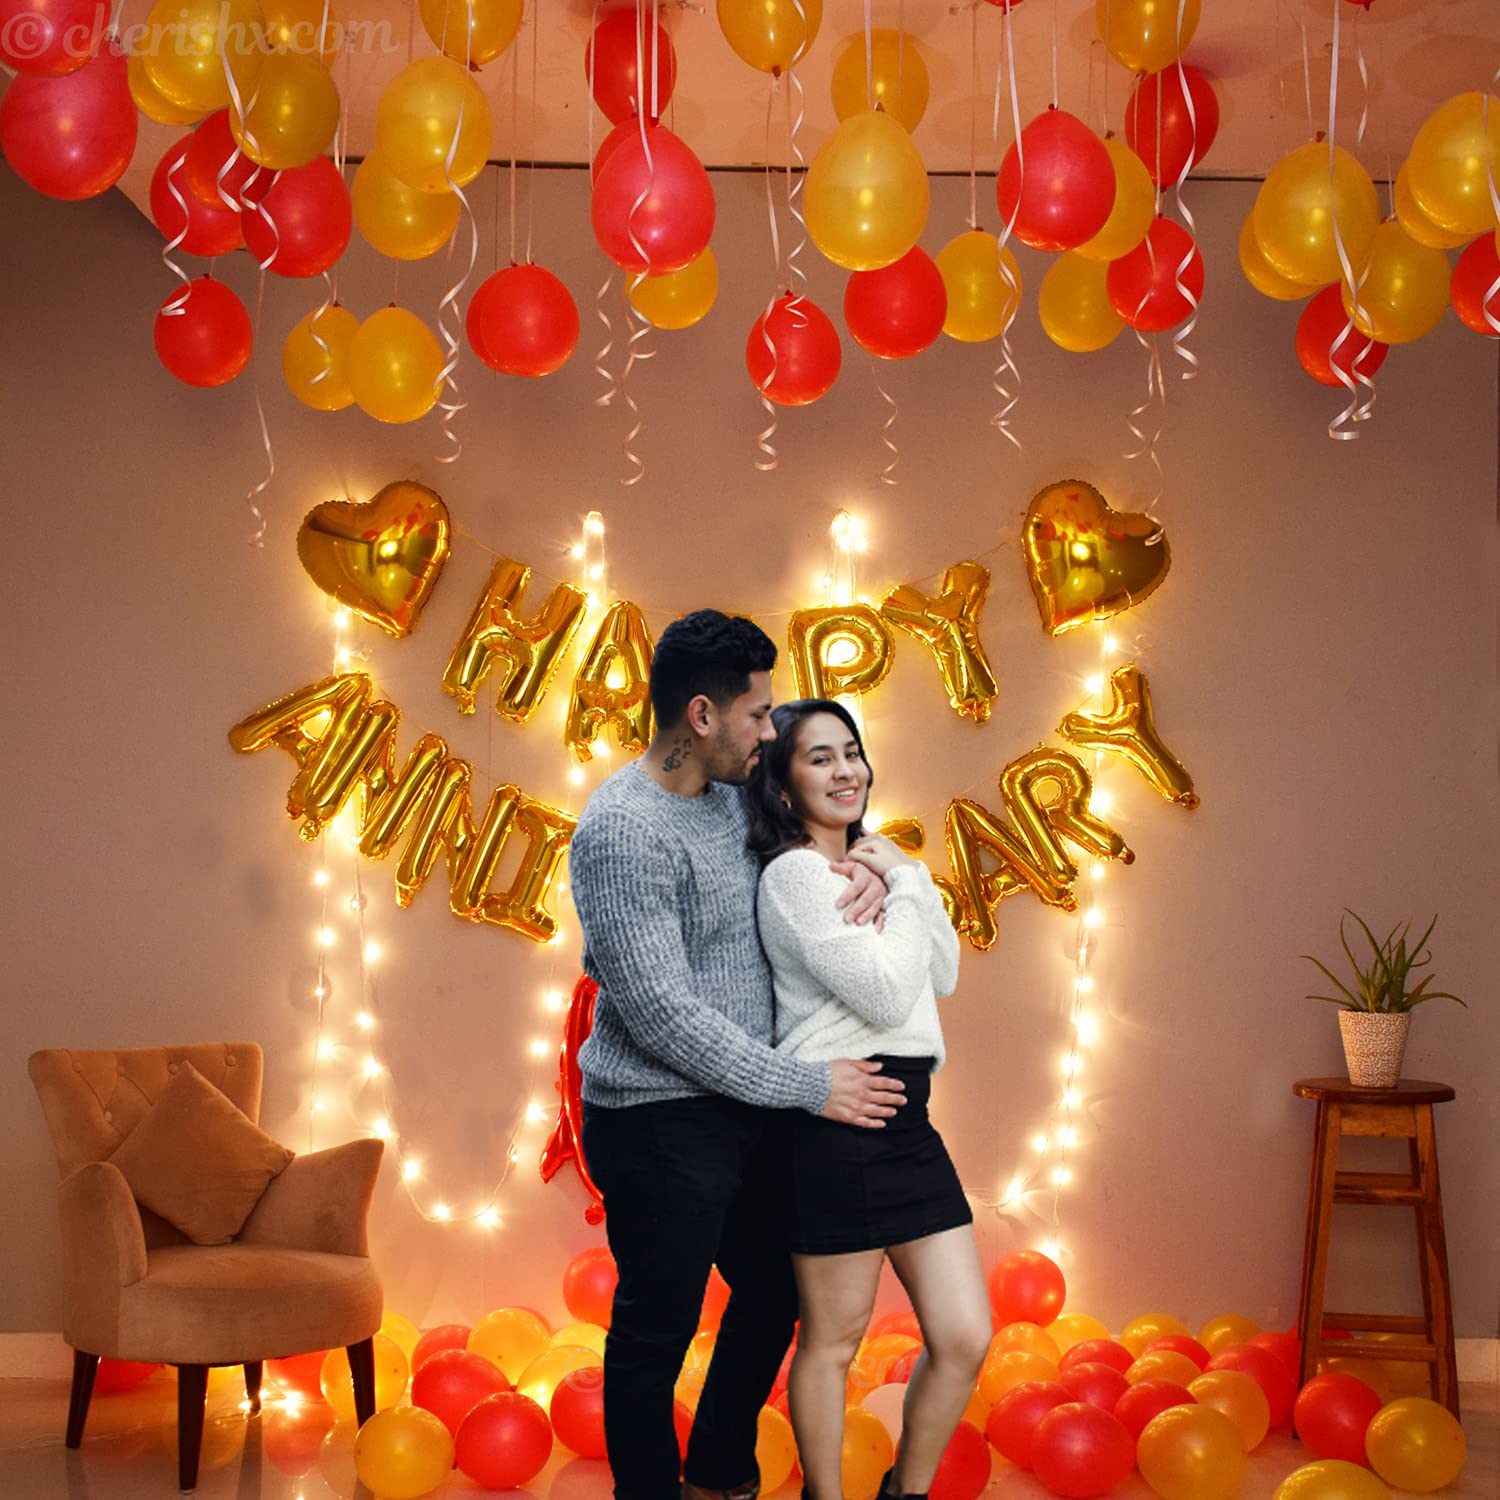 Happy Anniversary Decoration Items With Lights Kit Combo For Home Or Bedroom - Pack Of 61 Pcs - Golden Anniversary, Cursive Love, Heart Foil & Metallic Balloons LED String Light freeshipping - CherishX Partystore